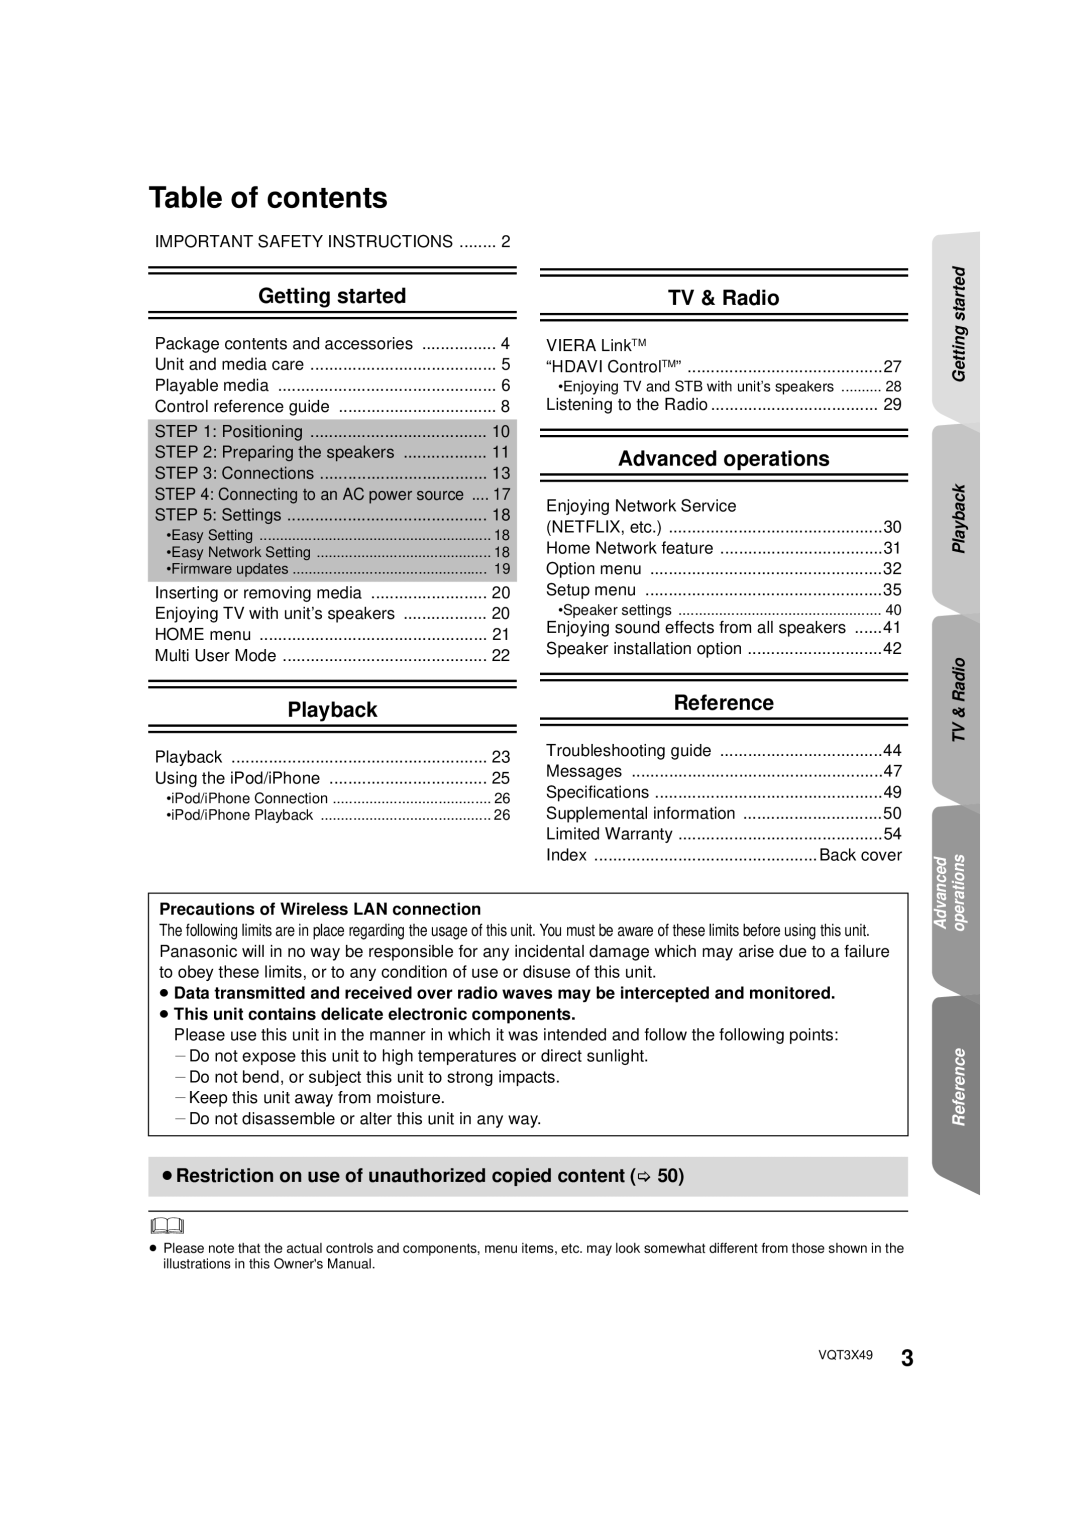 Panasonic SC-BTT490 owner manual Table of contents, Getting started, TV & Radio, Advanced operations, Playback, Reference 